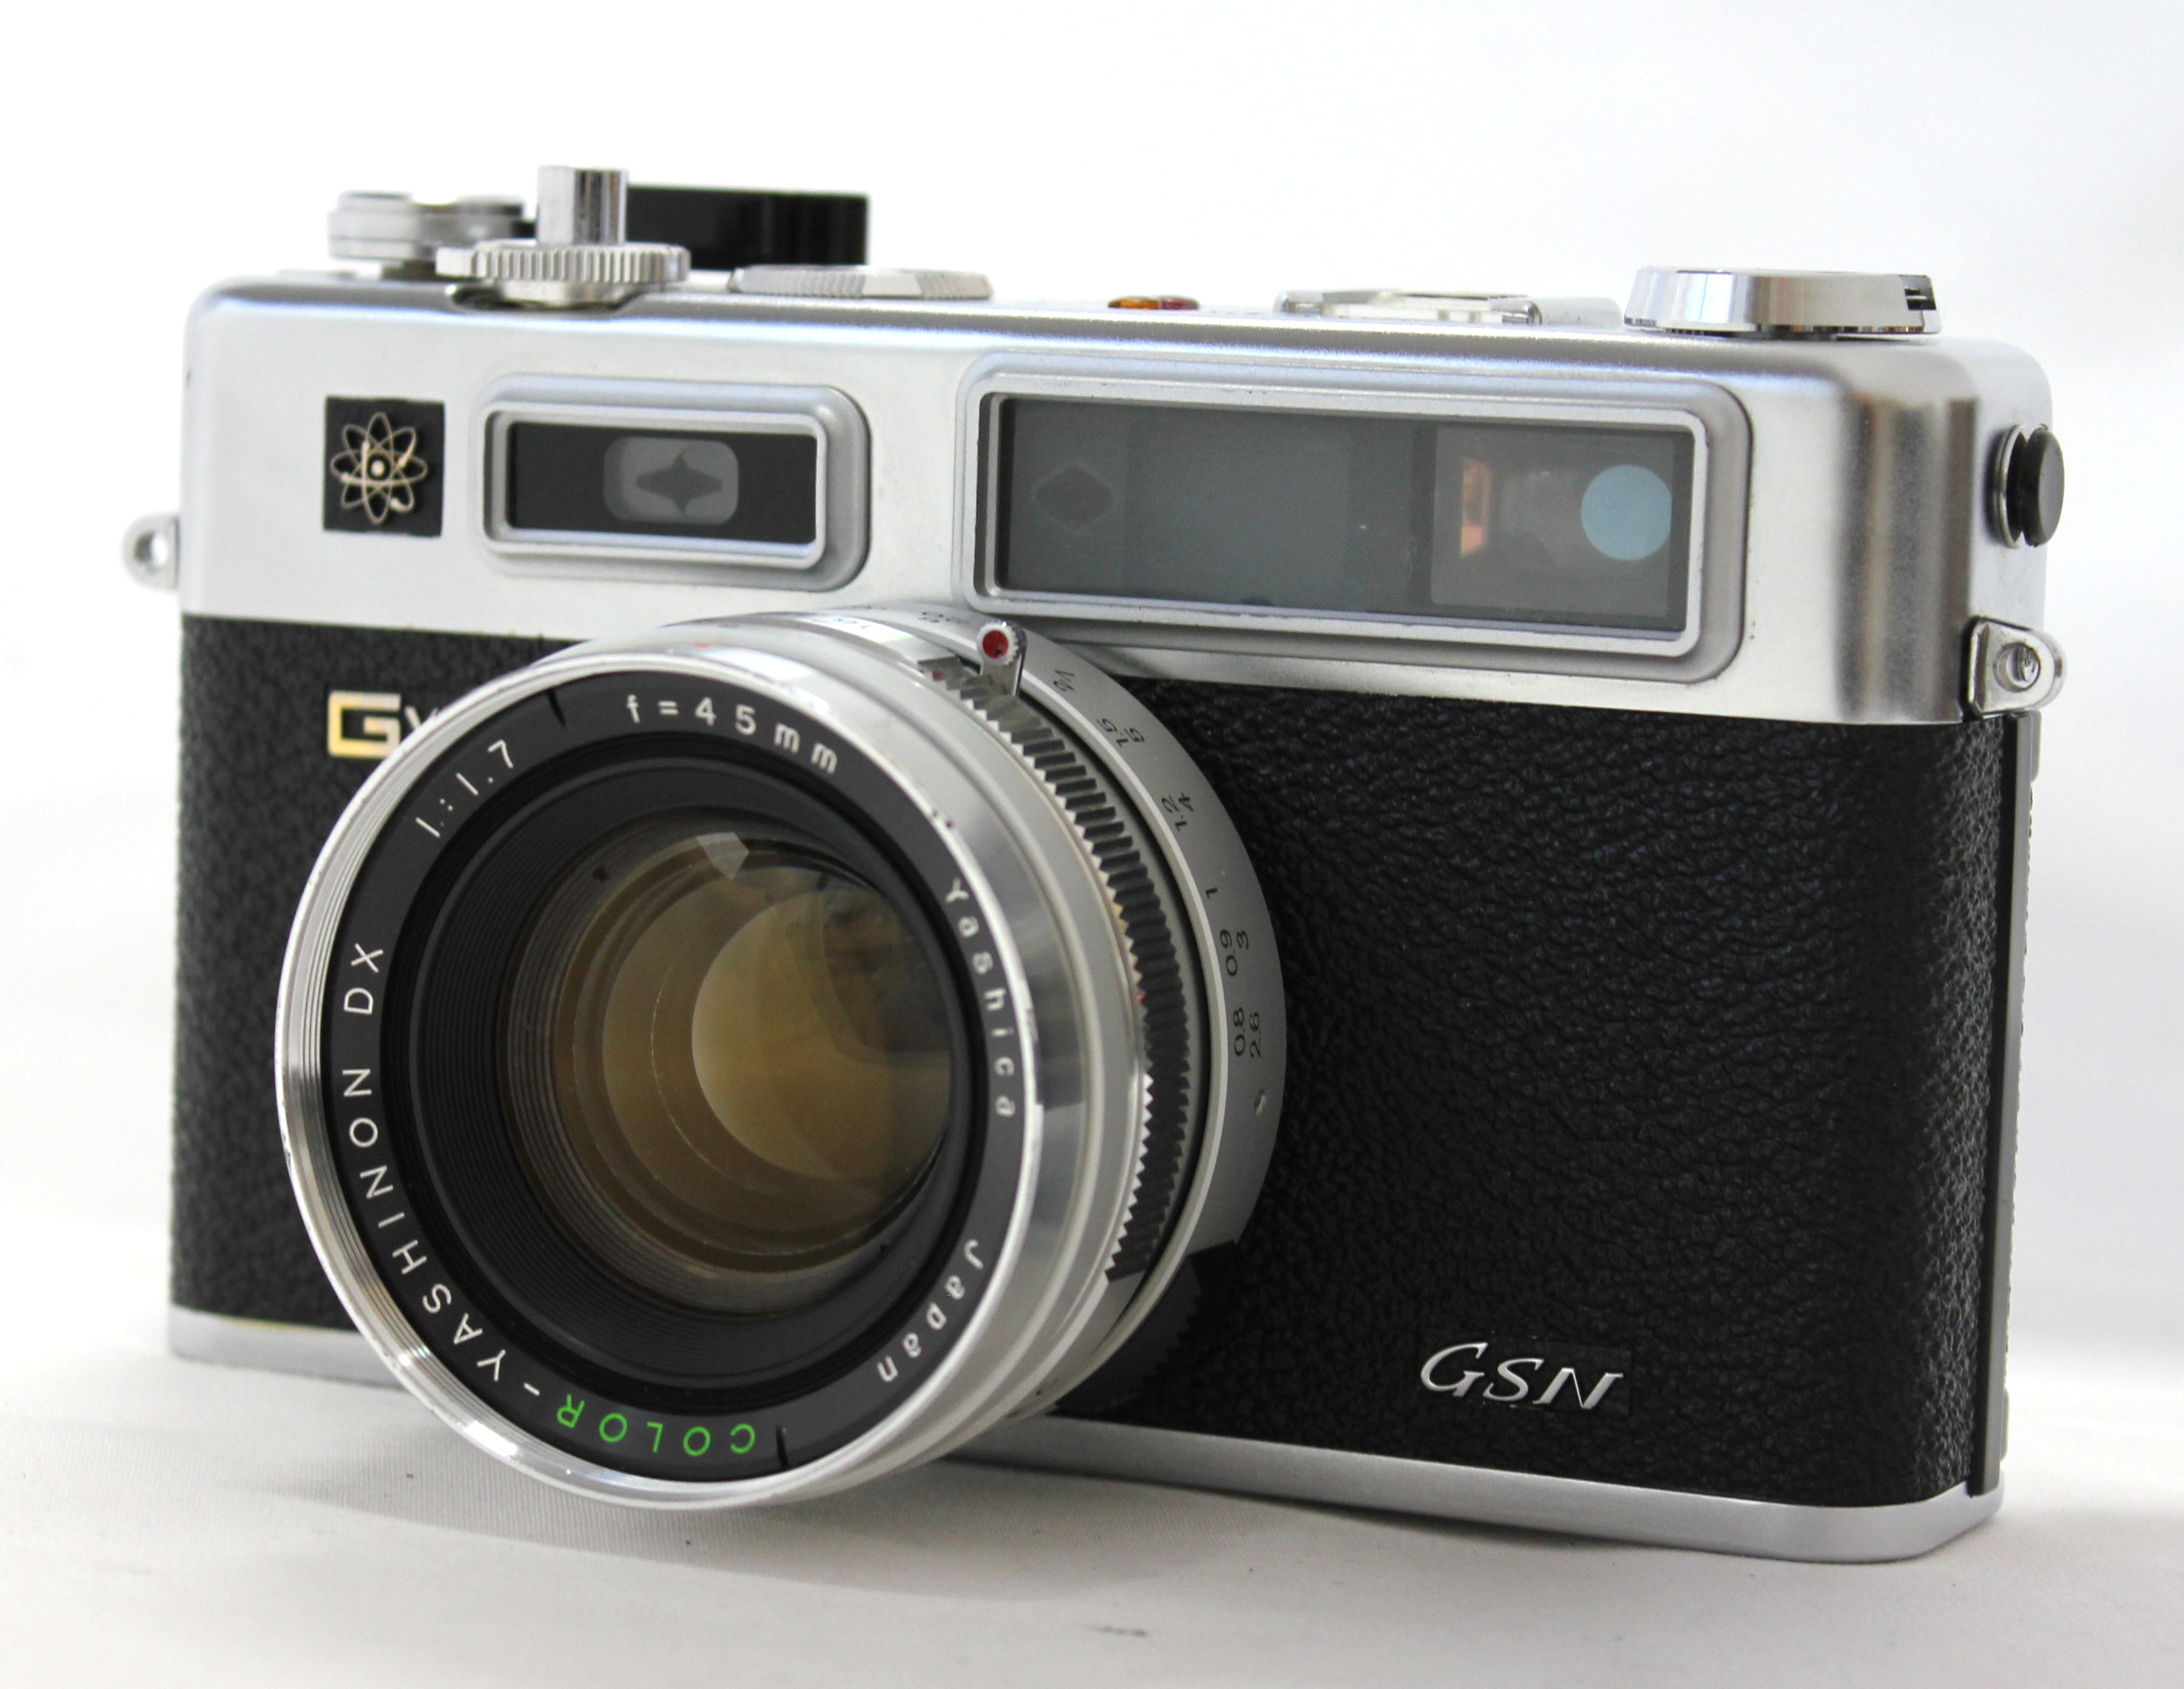 Japan Used Camera Shop | [Near Mint] Yashica Electro 35 GSN Rangefinder Film Camera 45mm F/1.7 from Japan